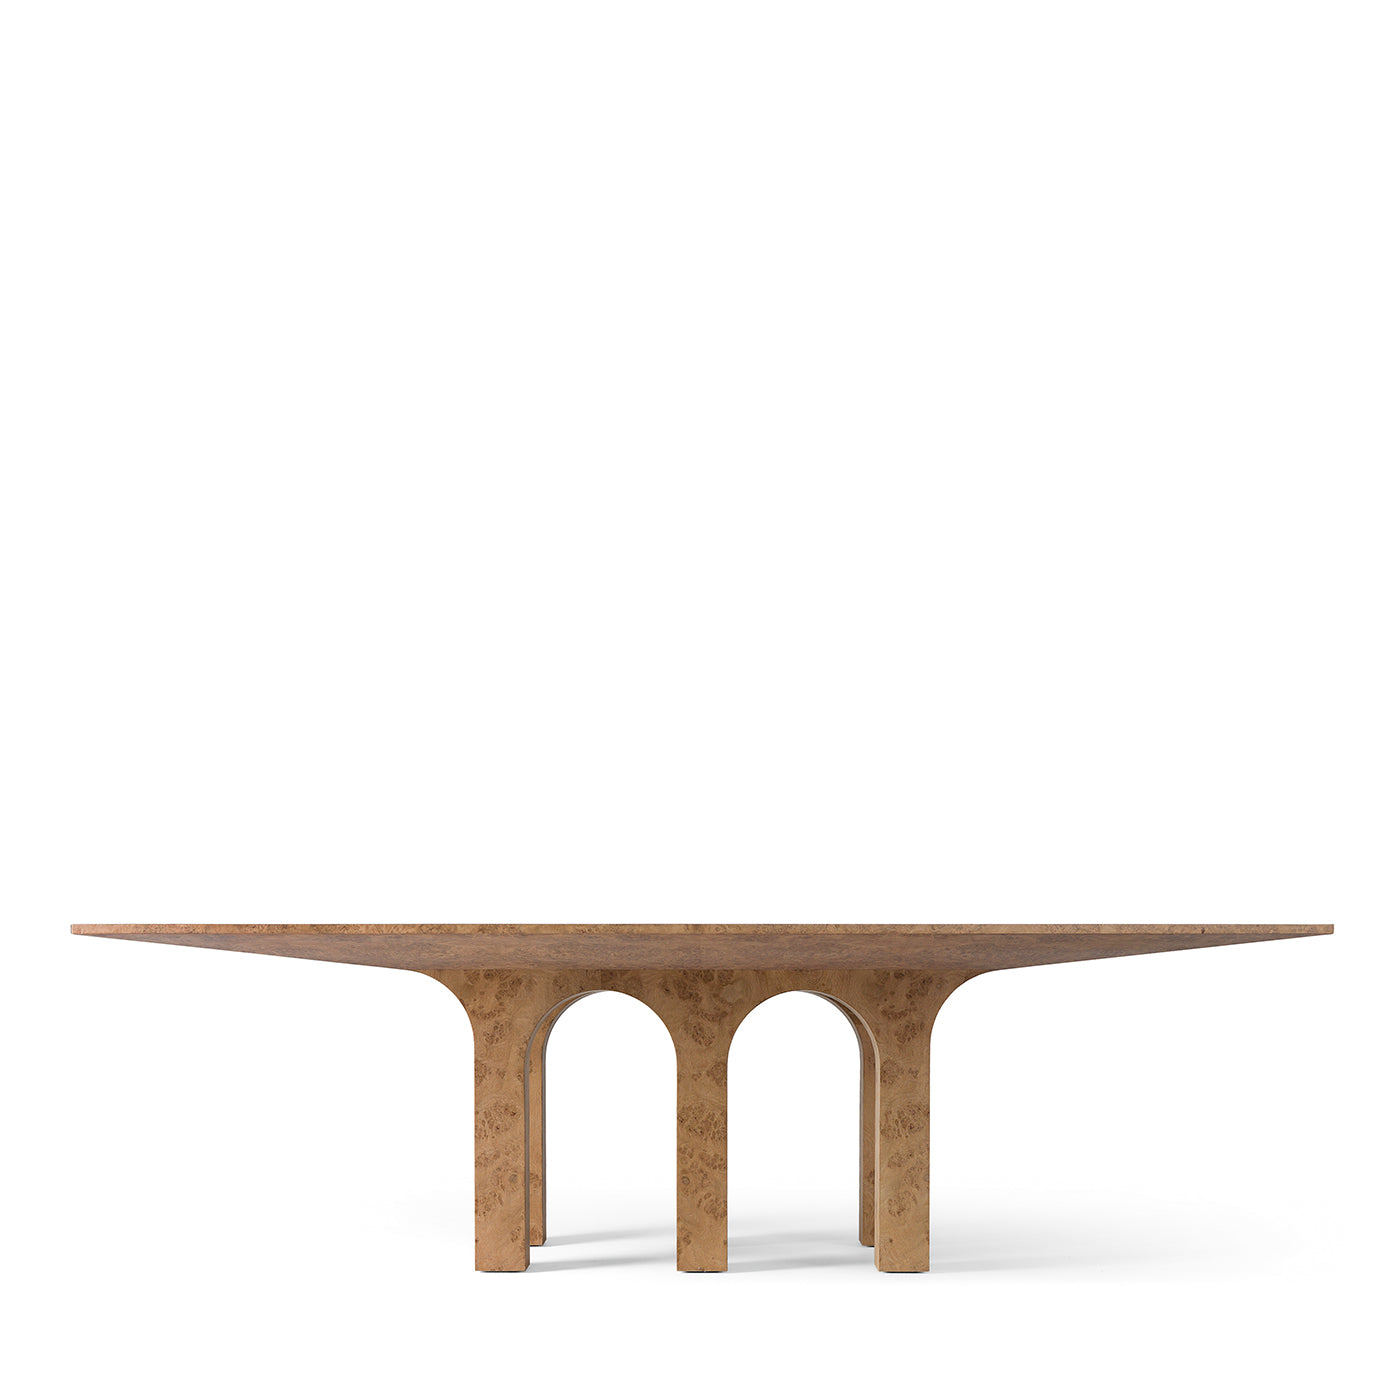 ARCHI Dining Table in burl by StorageMilano - Alternative view 1